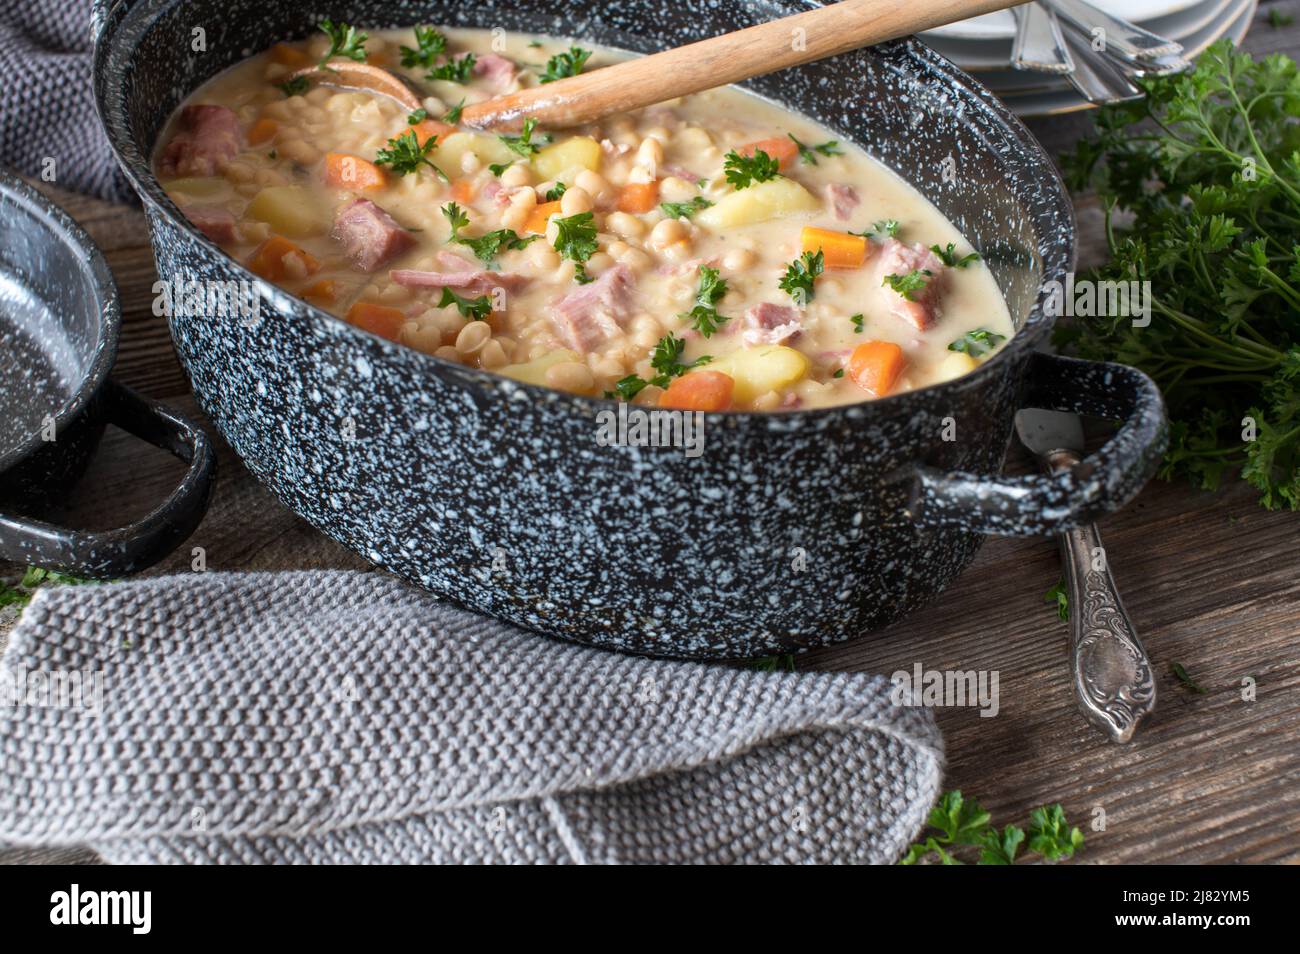 Rustic stew with white beans, vegetables, potatoes and pork meat in old-fashioned pot on wooden table Stock Photo